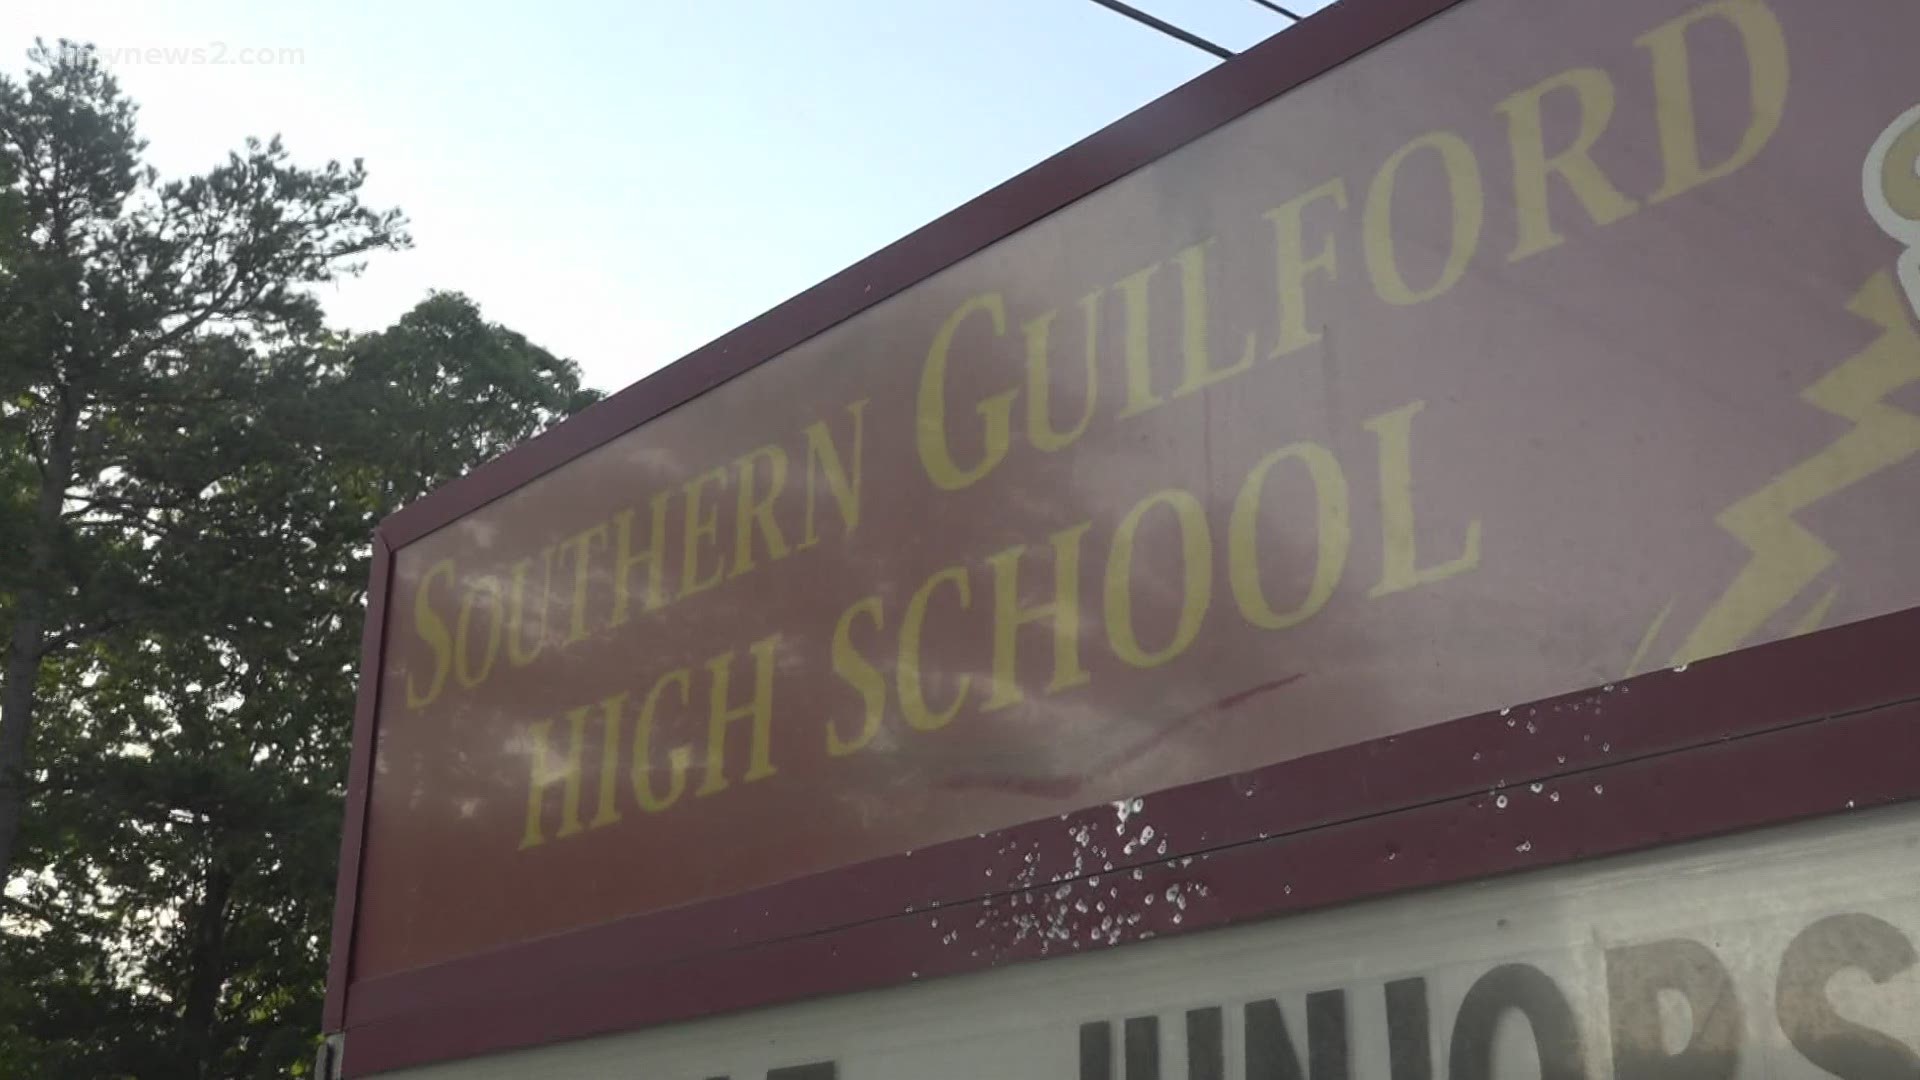 Guilford County School district was supposed to use a $10 million security bond to improve safety. WFMY News 2 tracked where the money went.